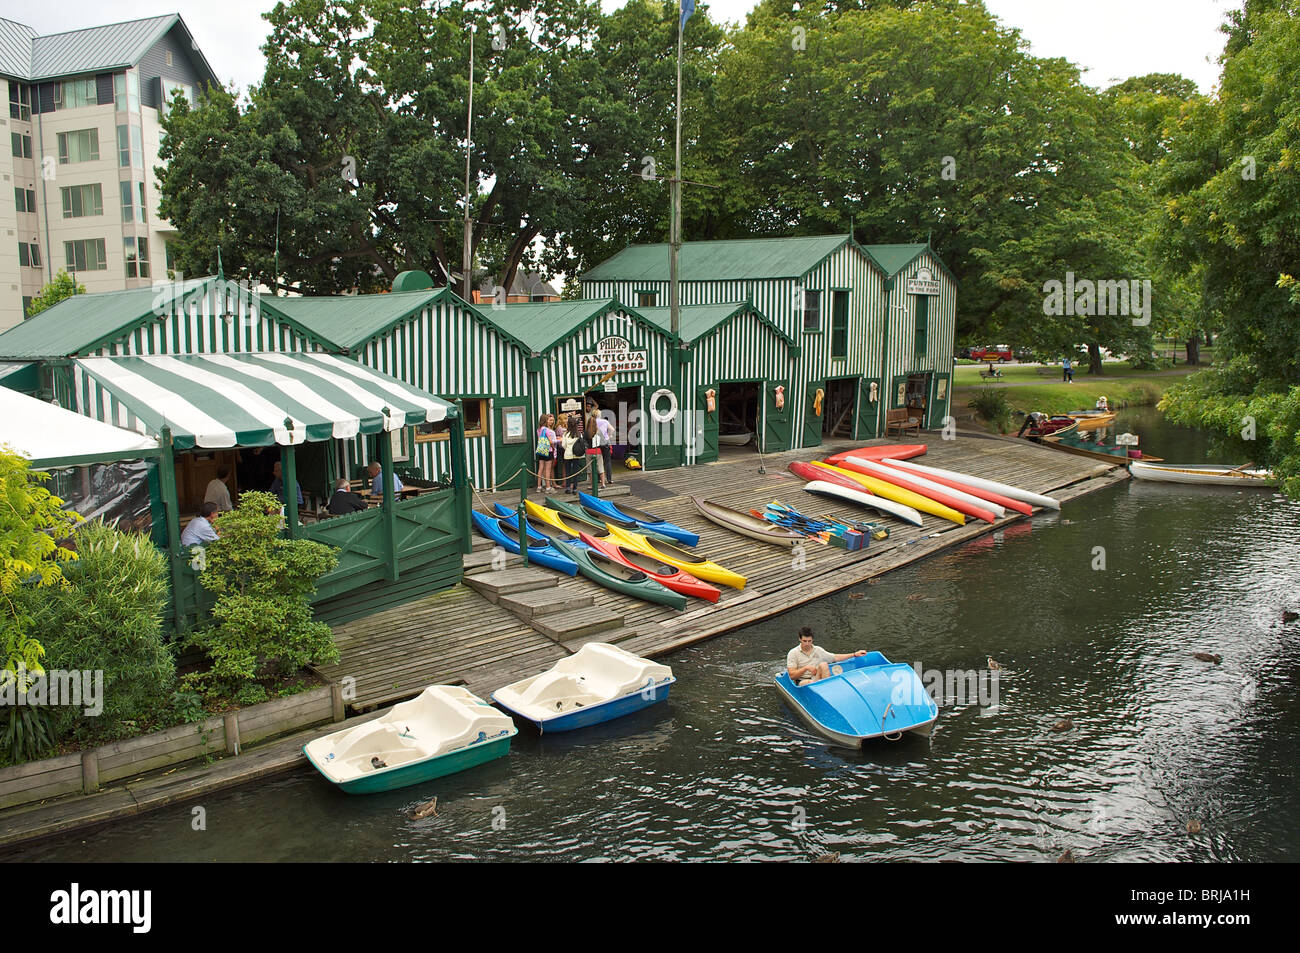 Antigua tearooms and canoe hire on the Avon River, Christchurch, New Zealand Stock Photo